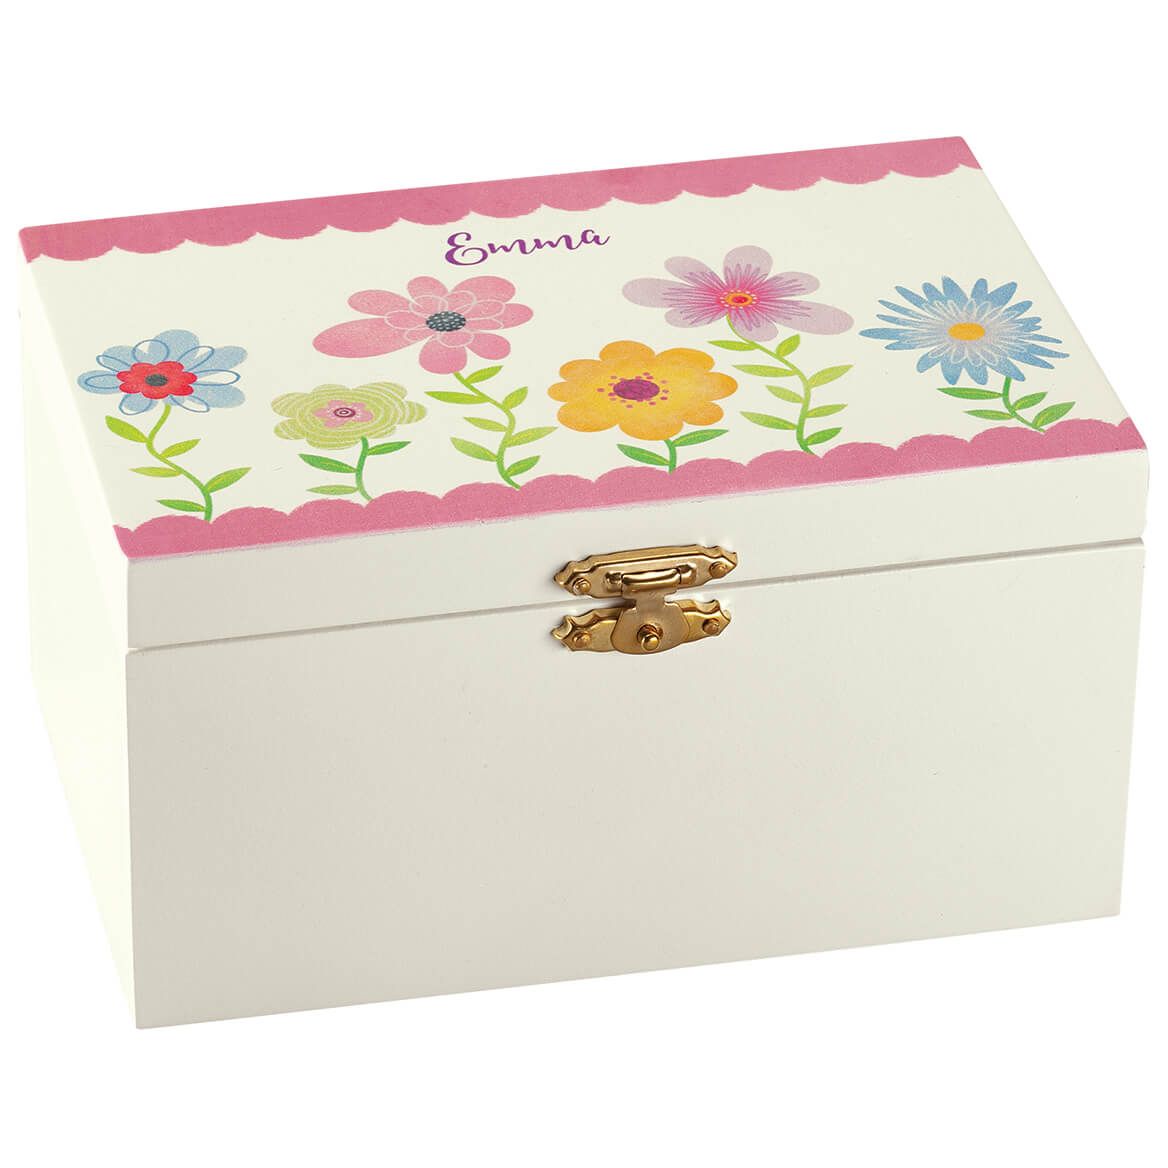 Personalized Floral Children's Jewelry Box + '-' + 375084